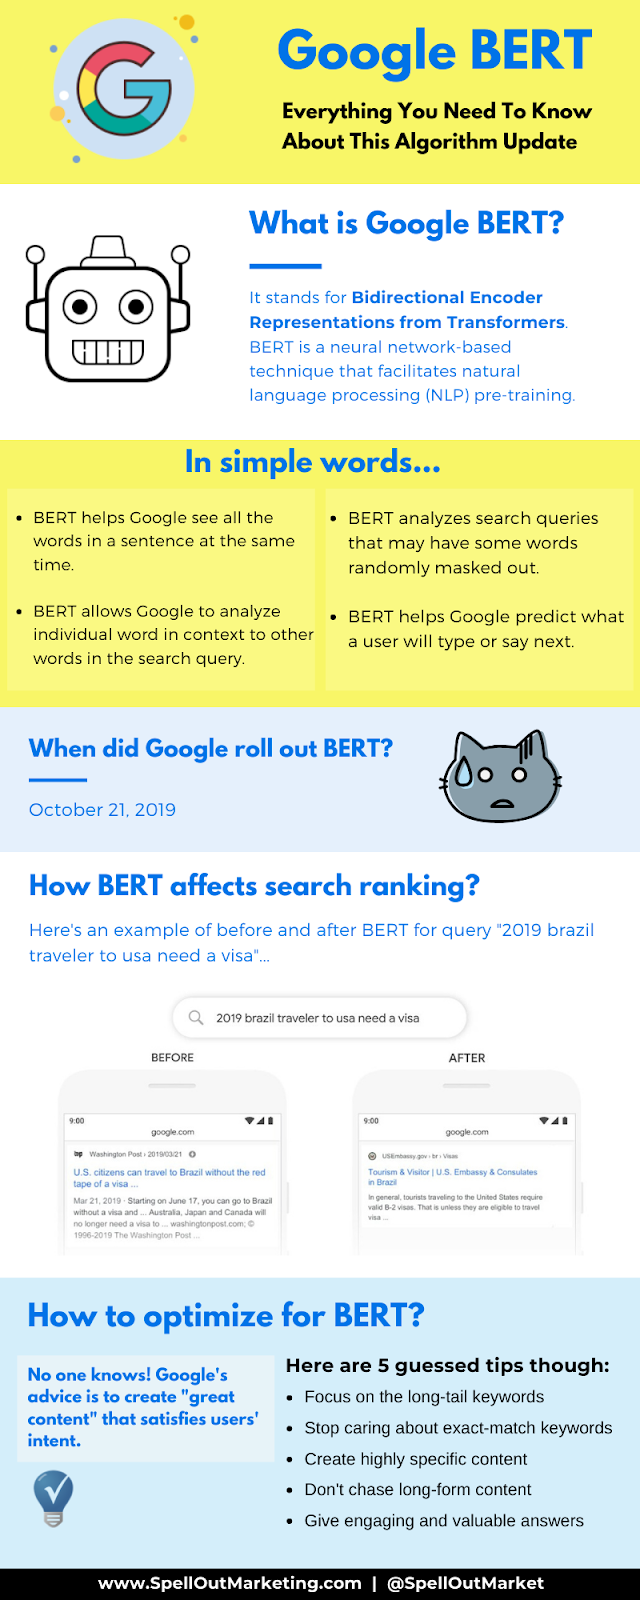 What is Google BERT update and how does Google BERT work explained